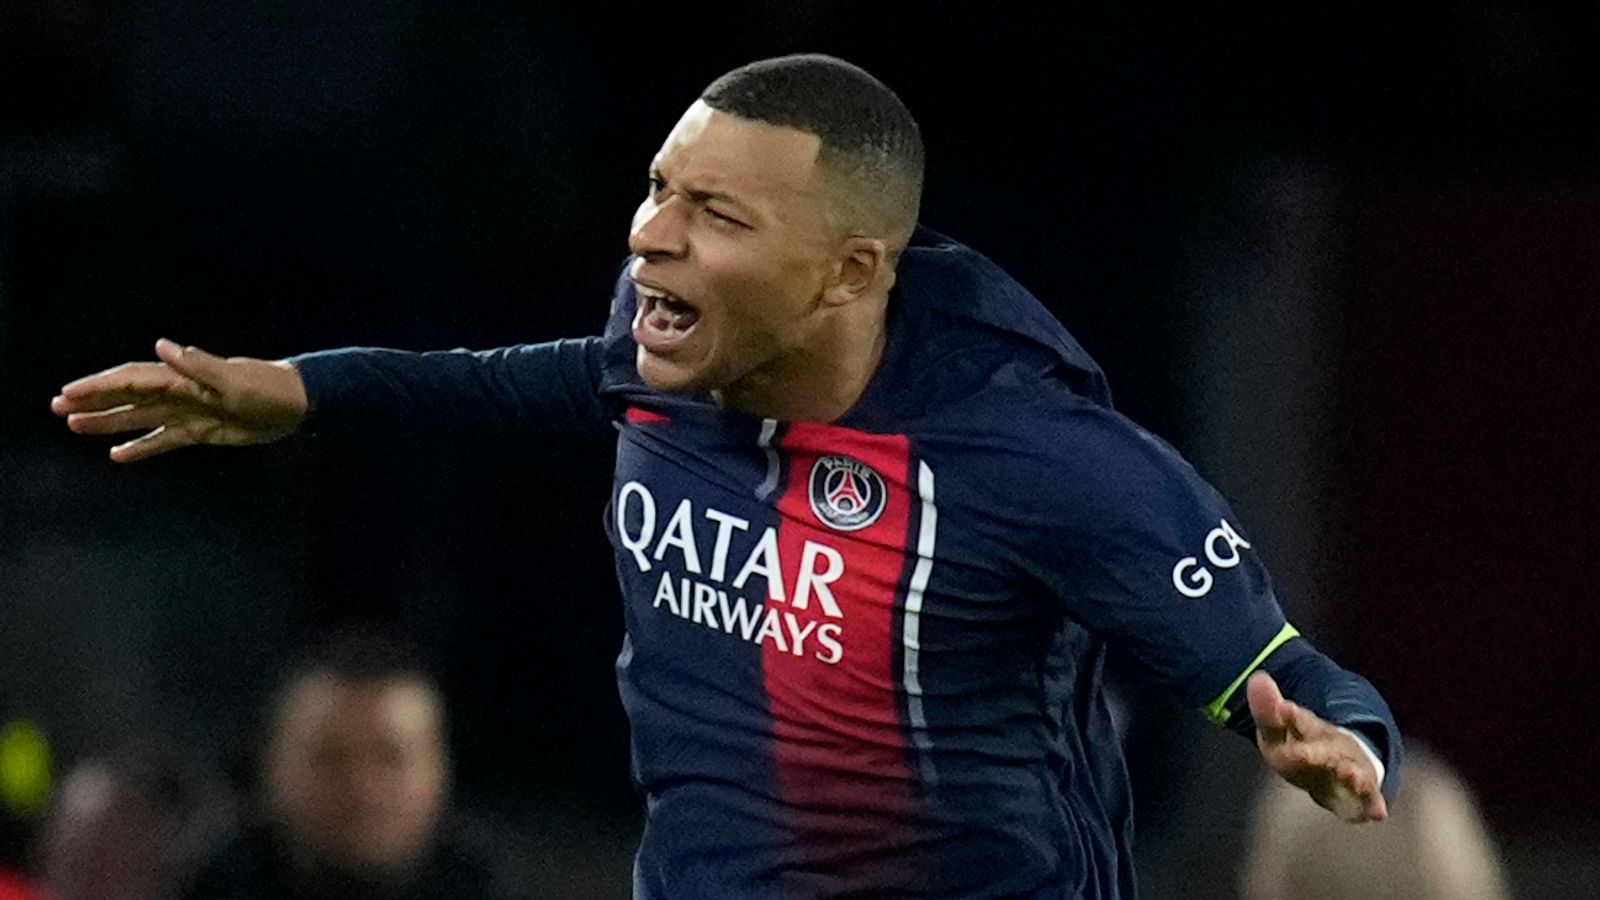 Kylian Mbappe Transfer News: Brutal PSG threat could blow race for